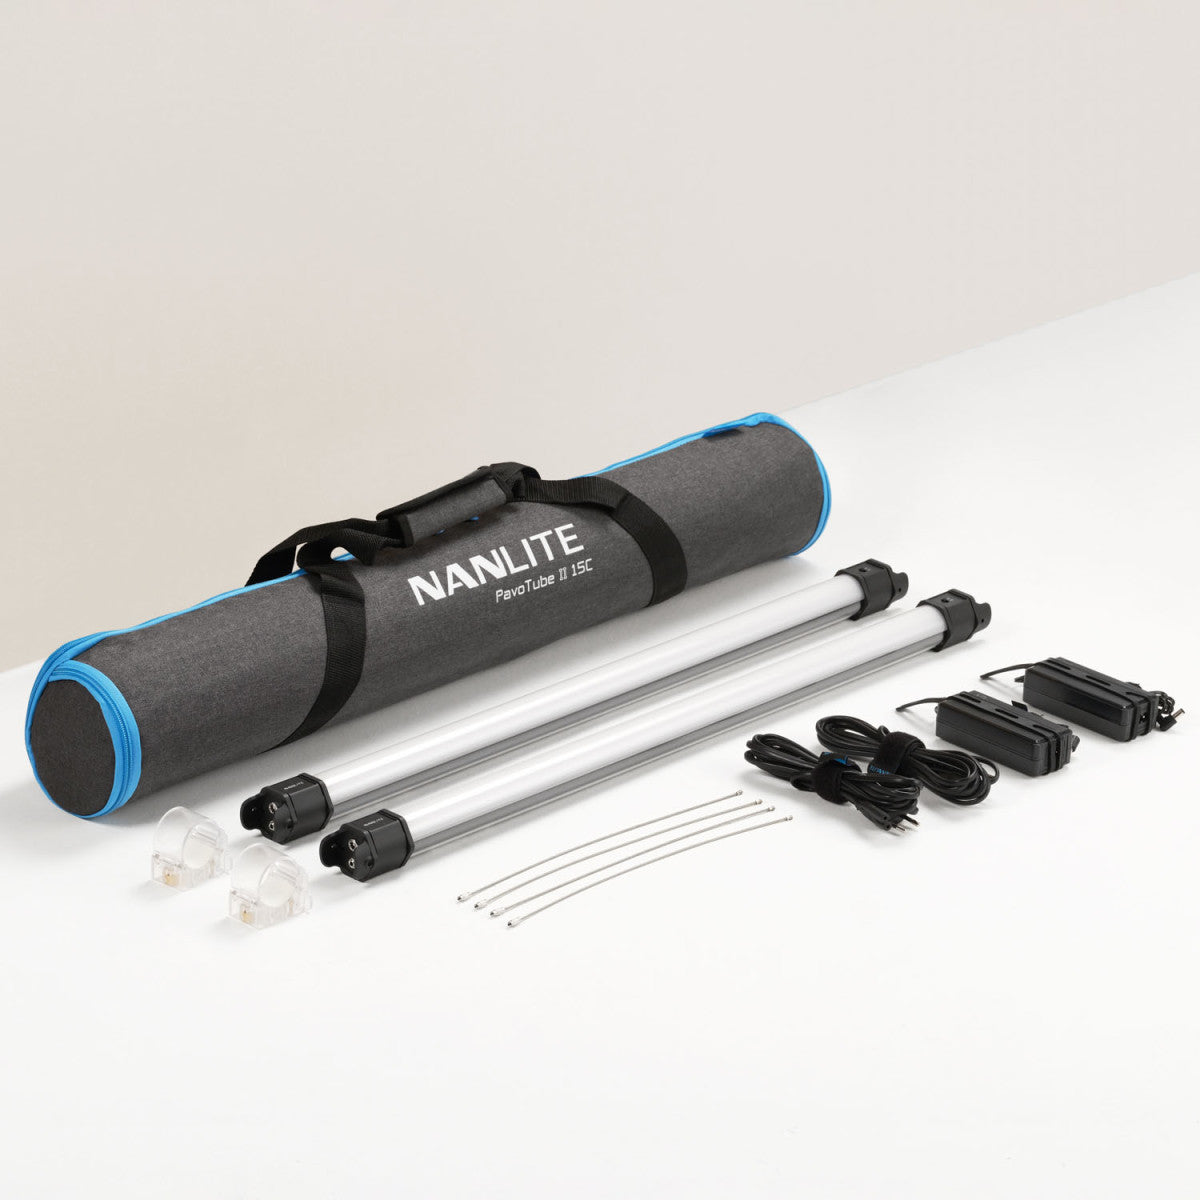 Nanlite PavoTube II 15C 2' LED Tube Lights with AC Chargers, Mounts, and Case 2 Light Kit